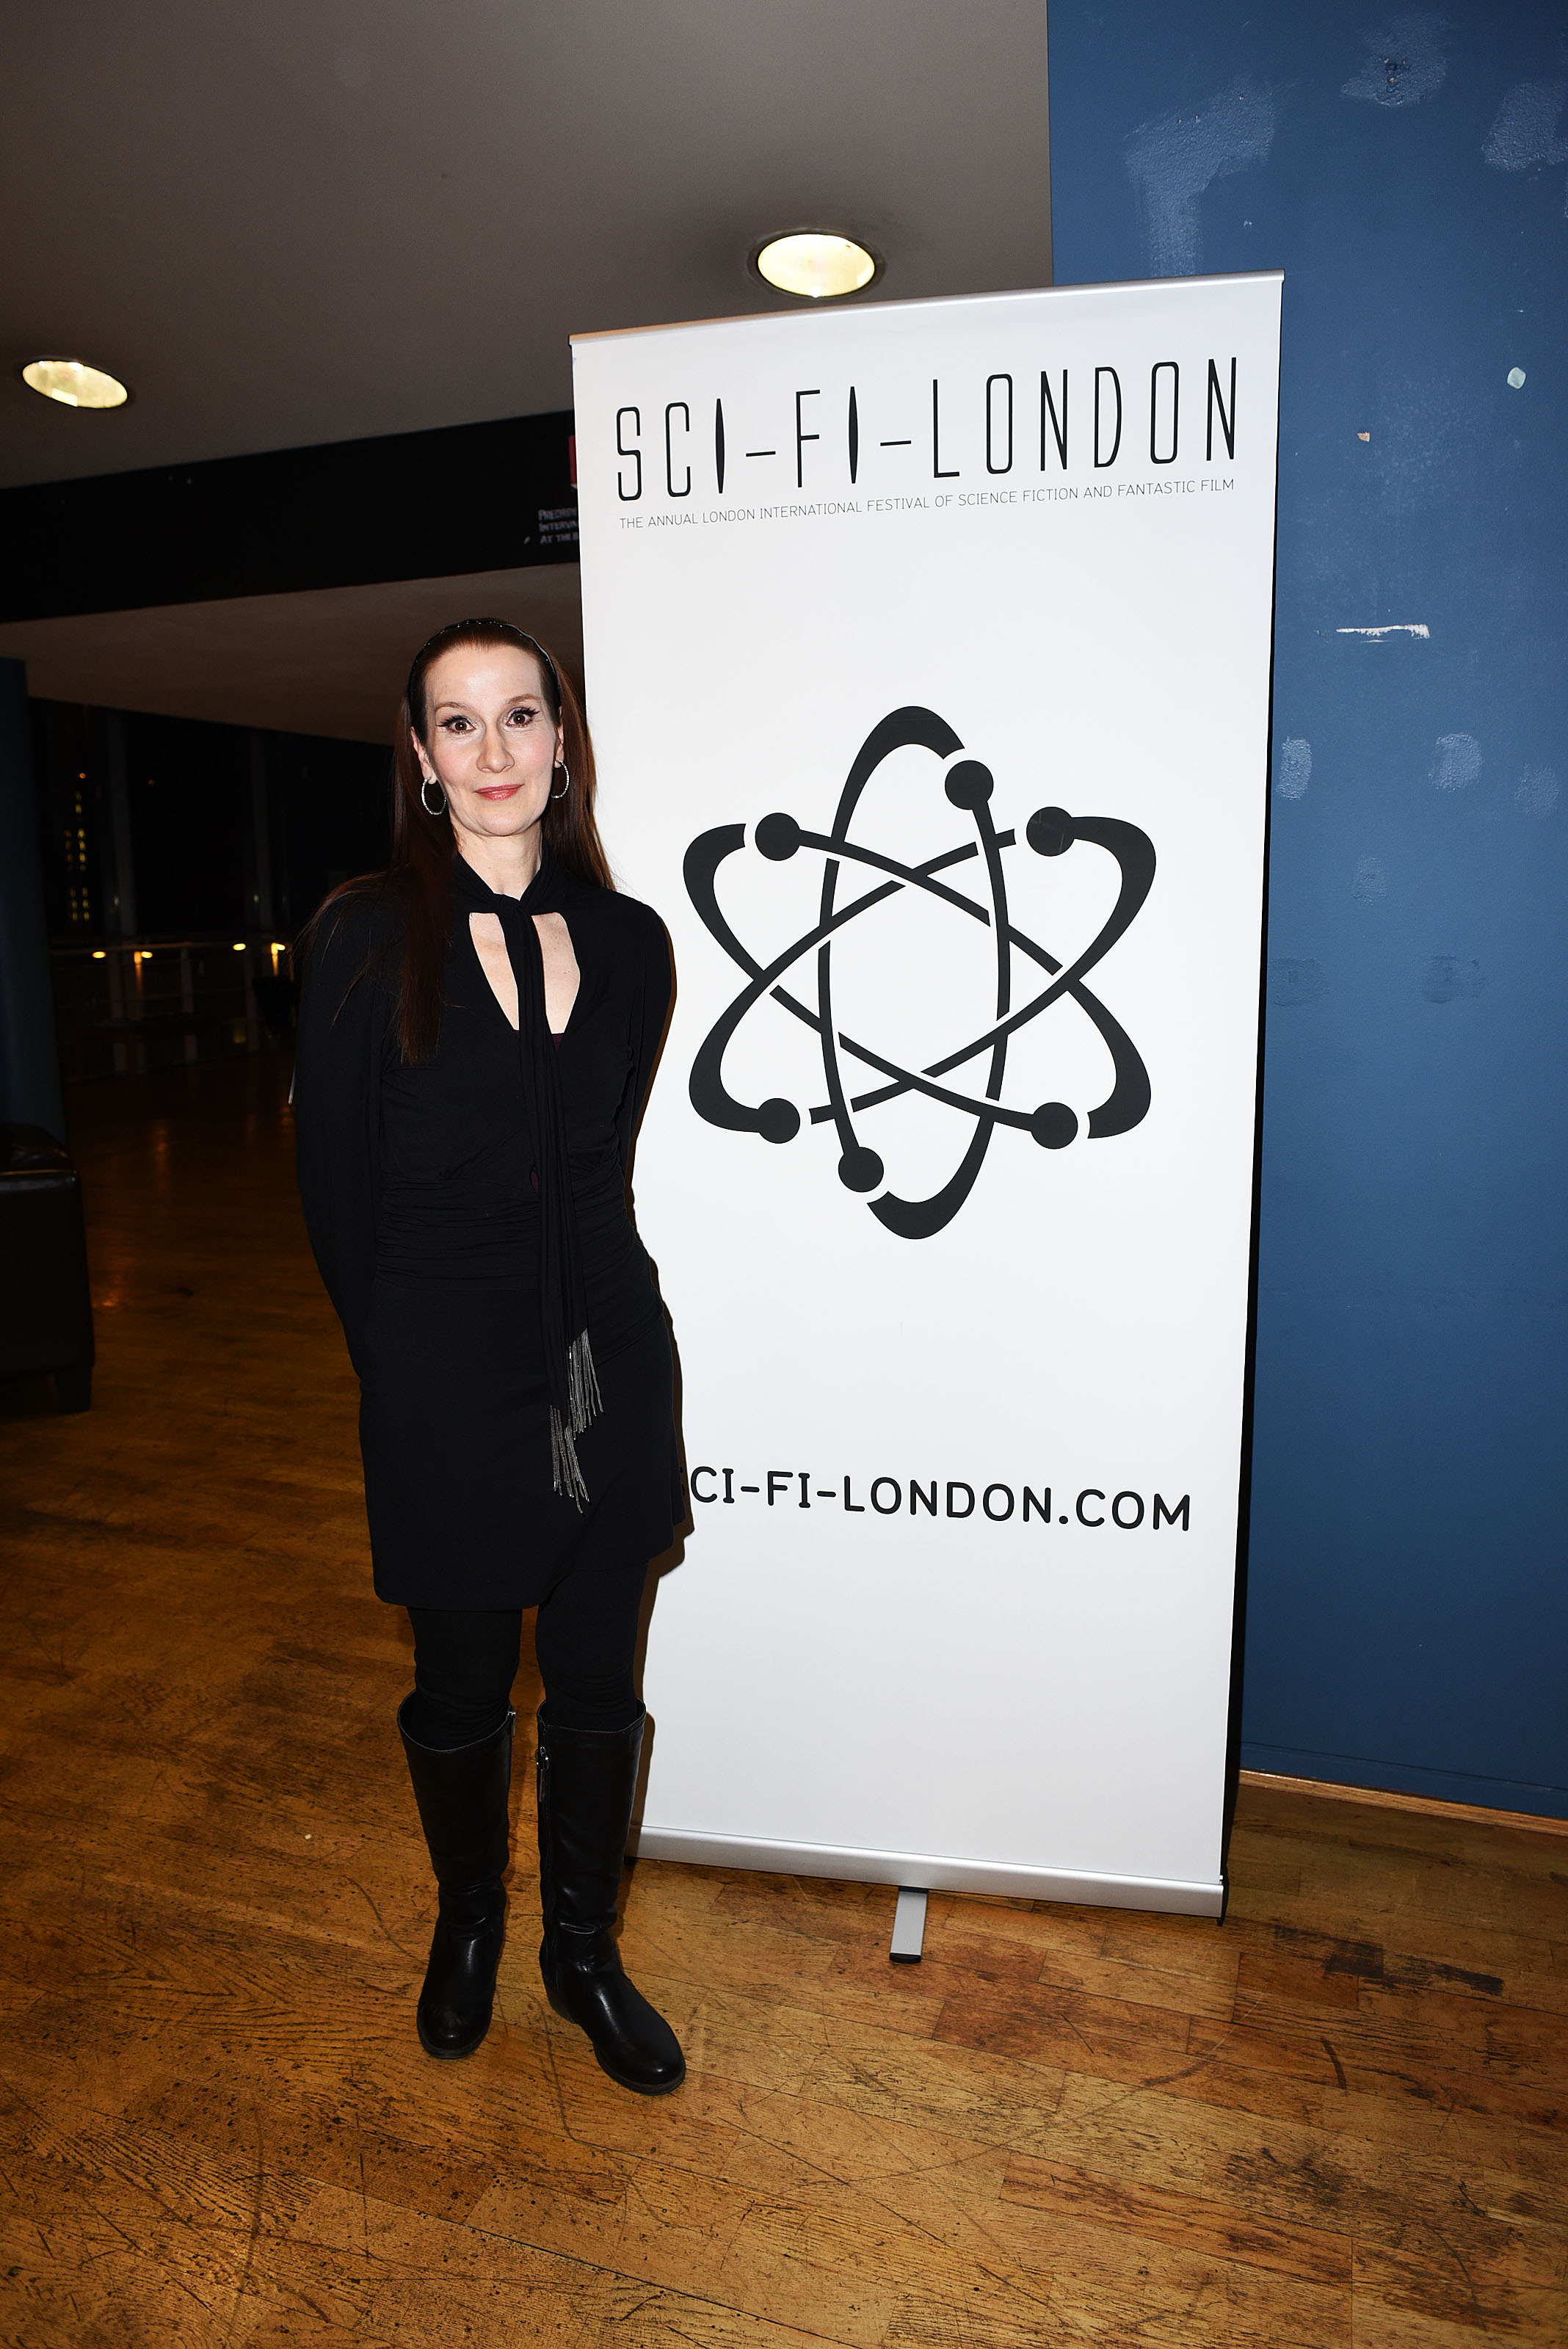 Brigitte Millar attending the screening of The Quiet Hour at the LONDON SCI-FI festival